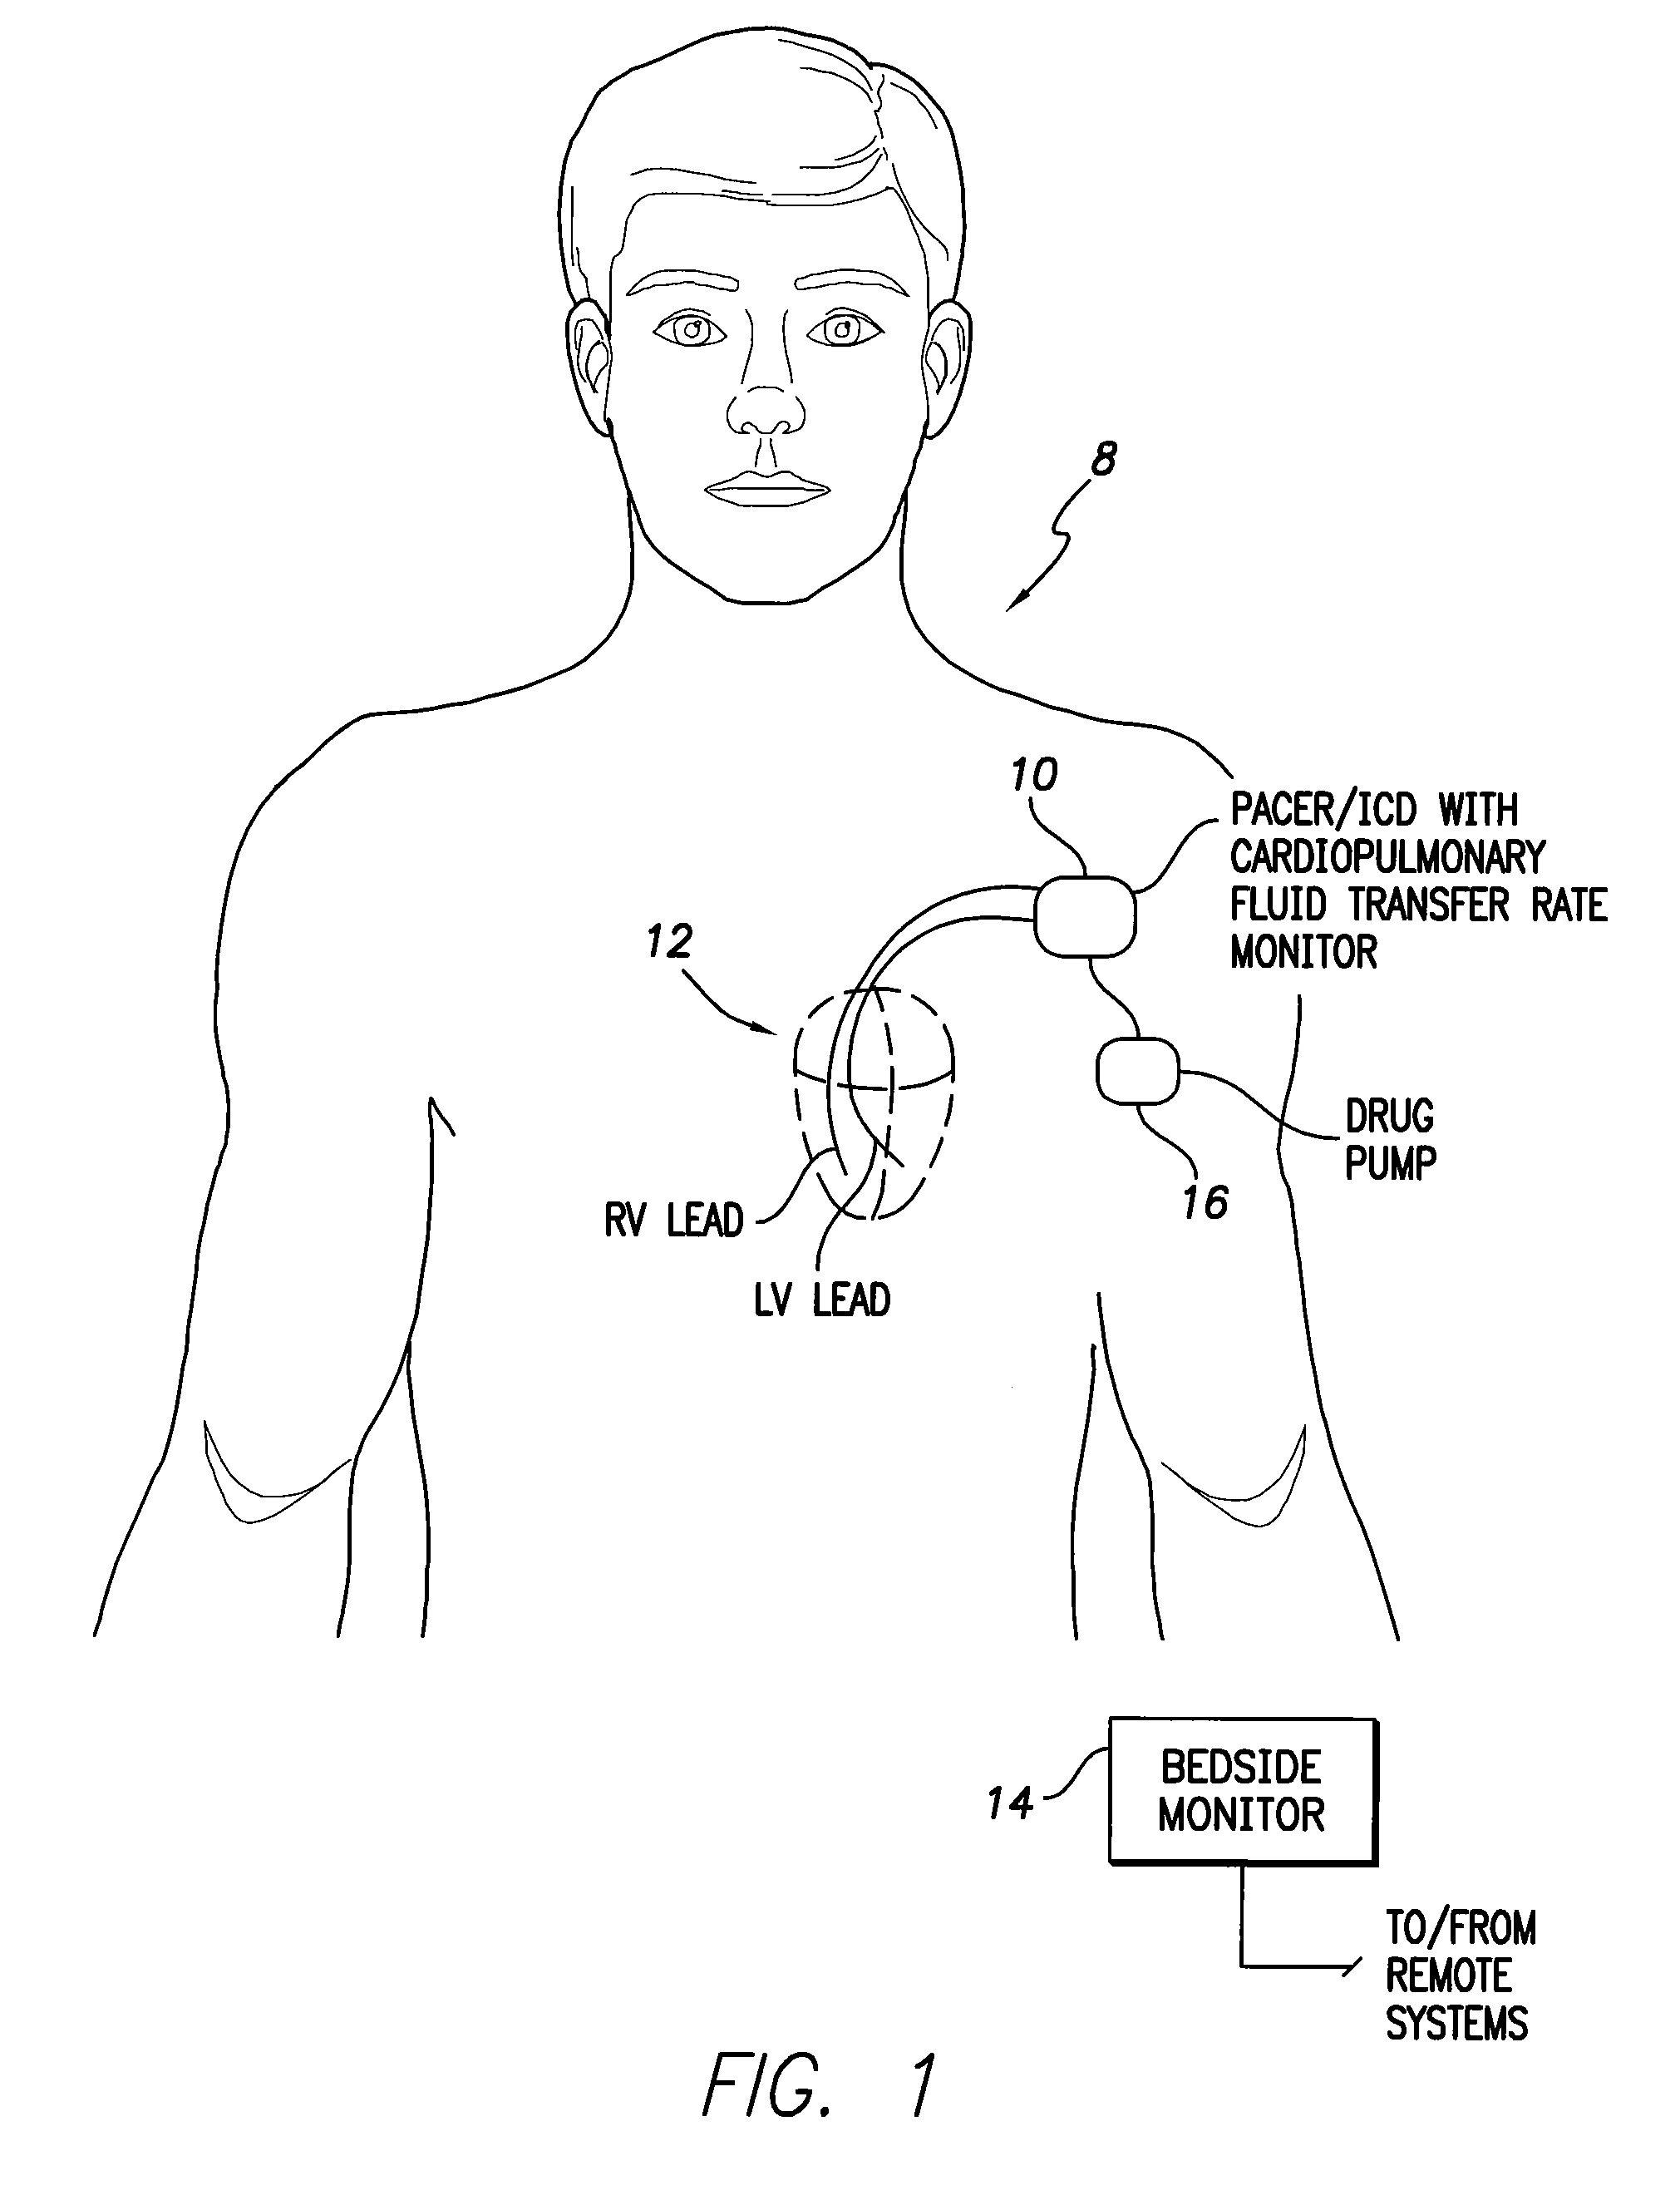 System and method for monitoring cardiopulmonary fluid transfer rates using an implantable medical device